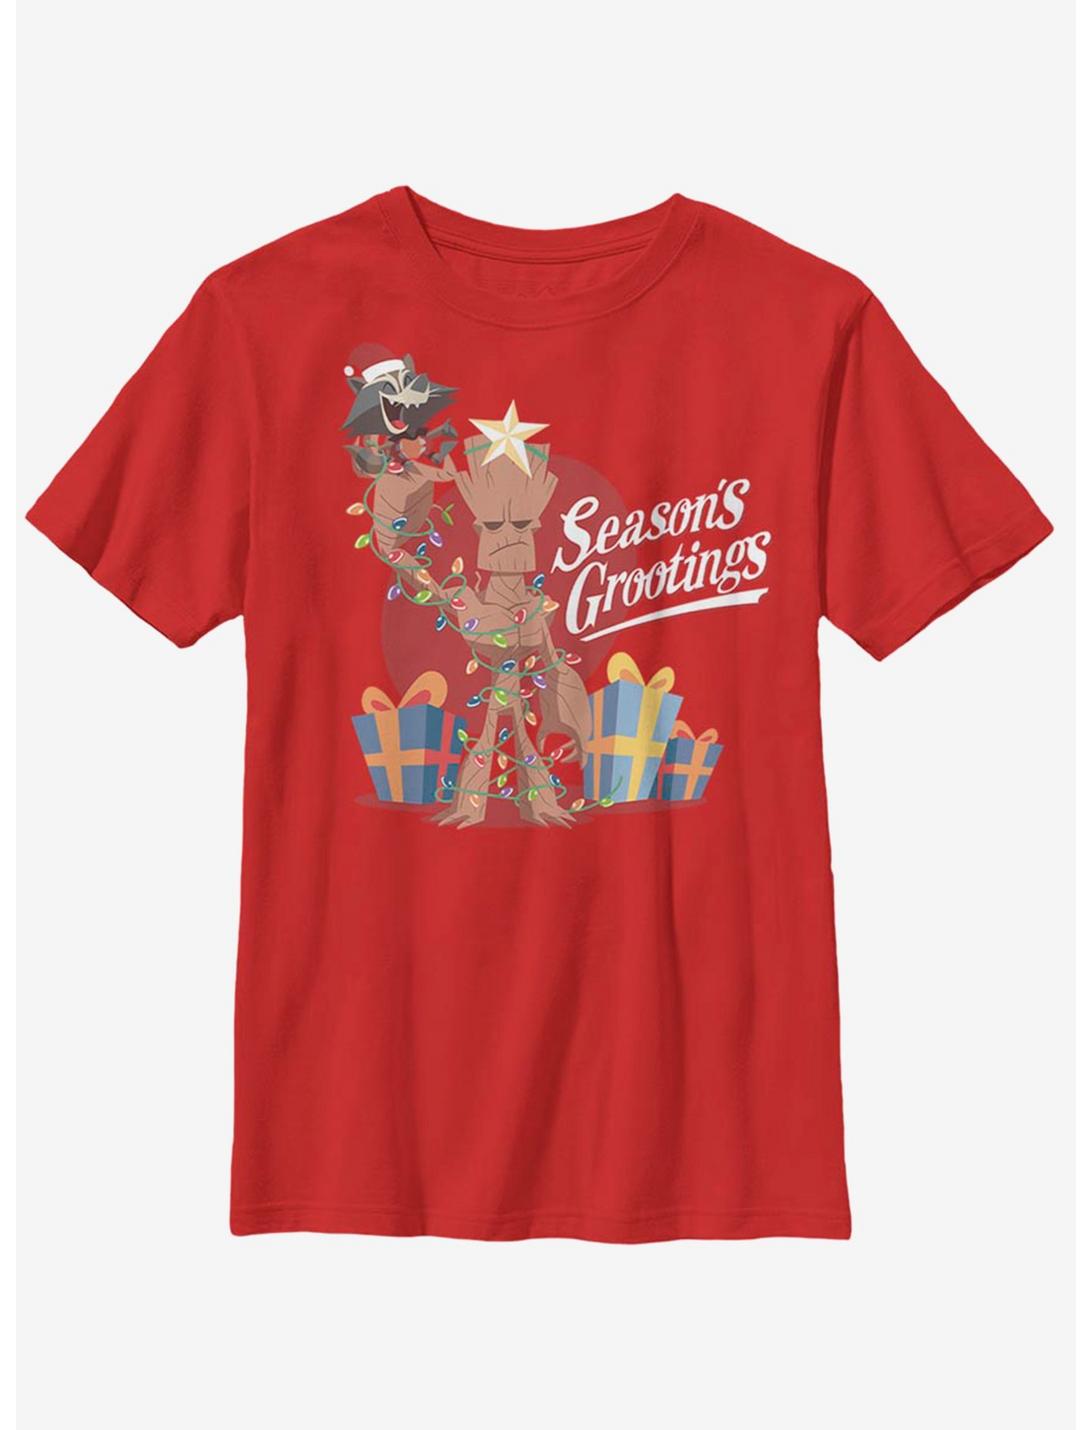 Plus Size Marvel Guardians Of The Galaxy Seasons Grootings Youth T-Shirt, RED, hi-res